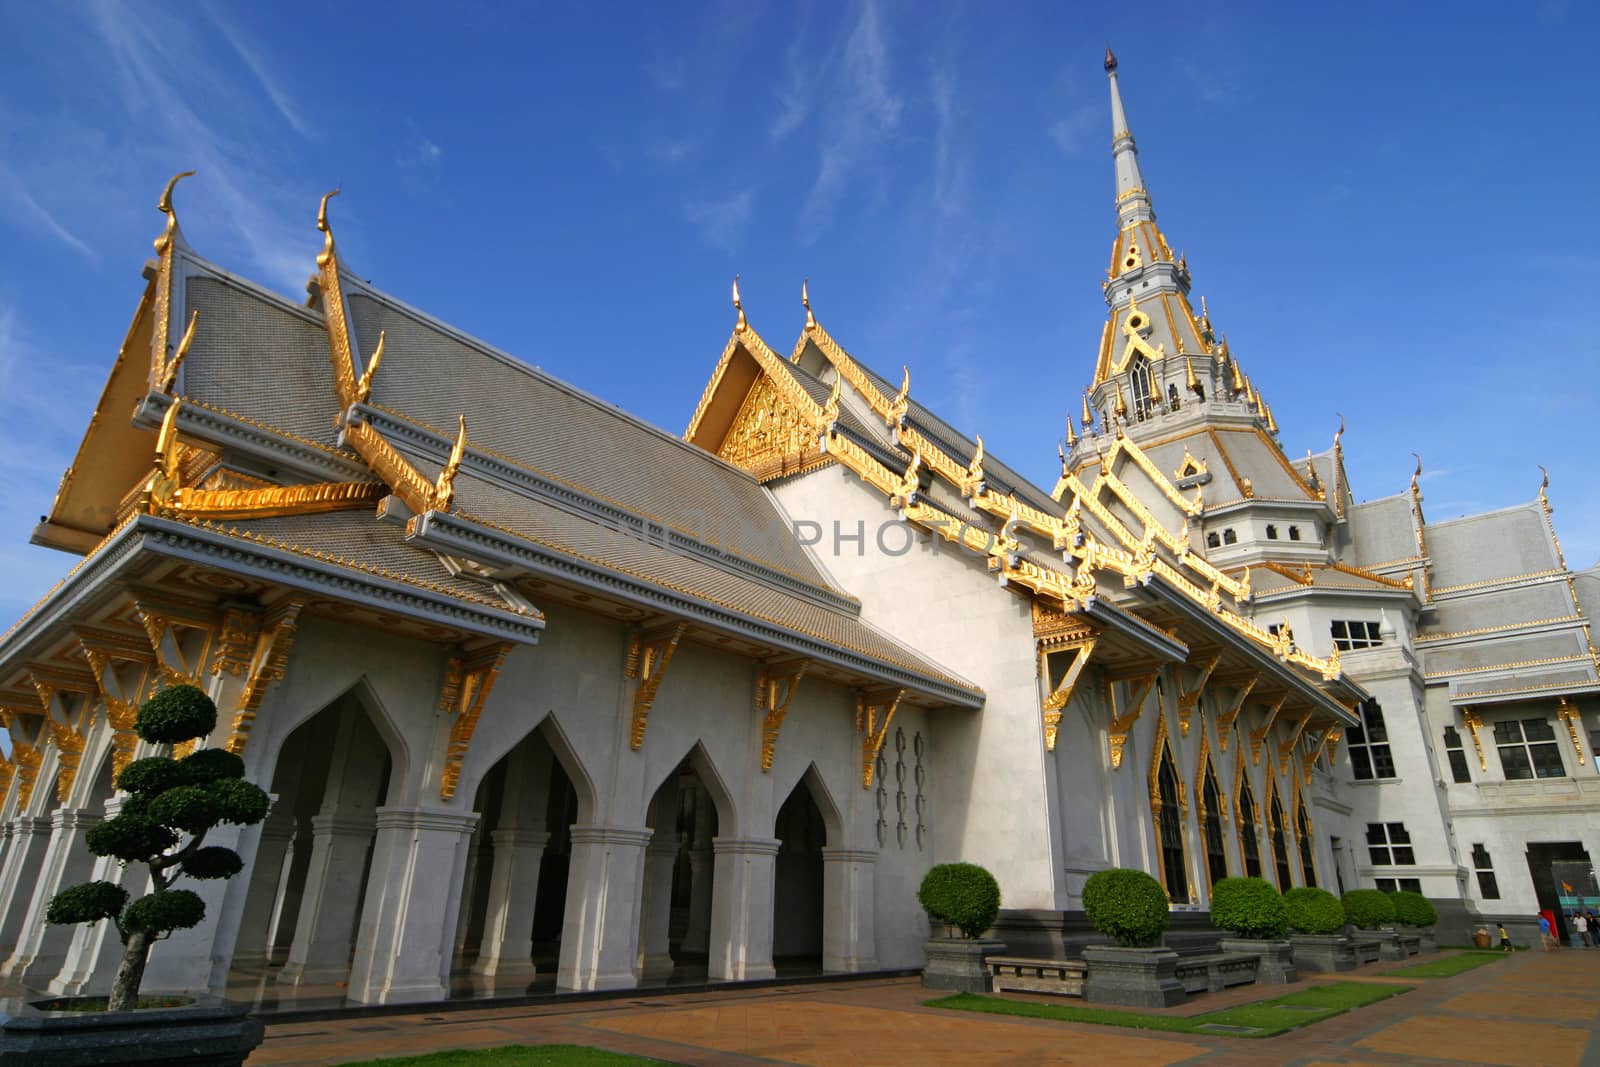 Wat Sothonwararam, a temple in Chachoengsao Province, Thailand by think4photop